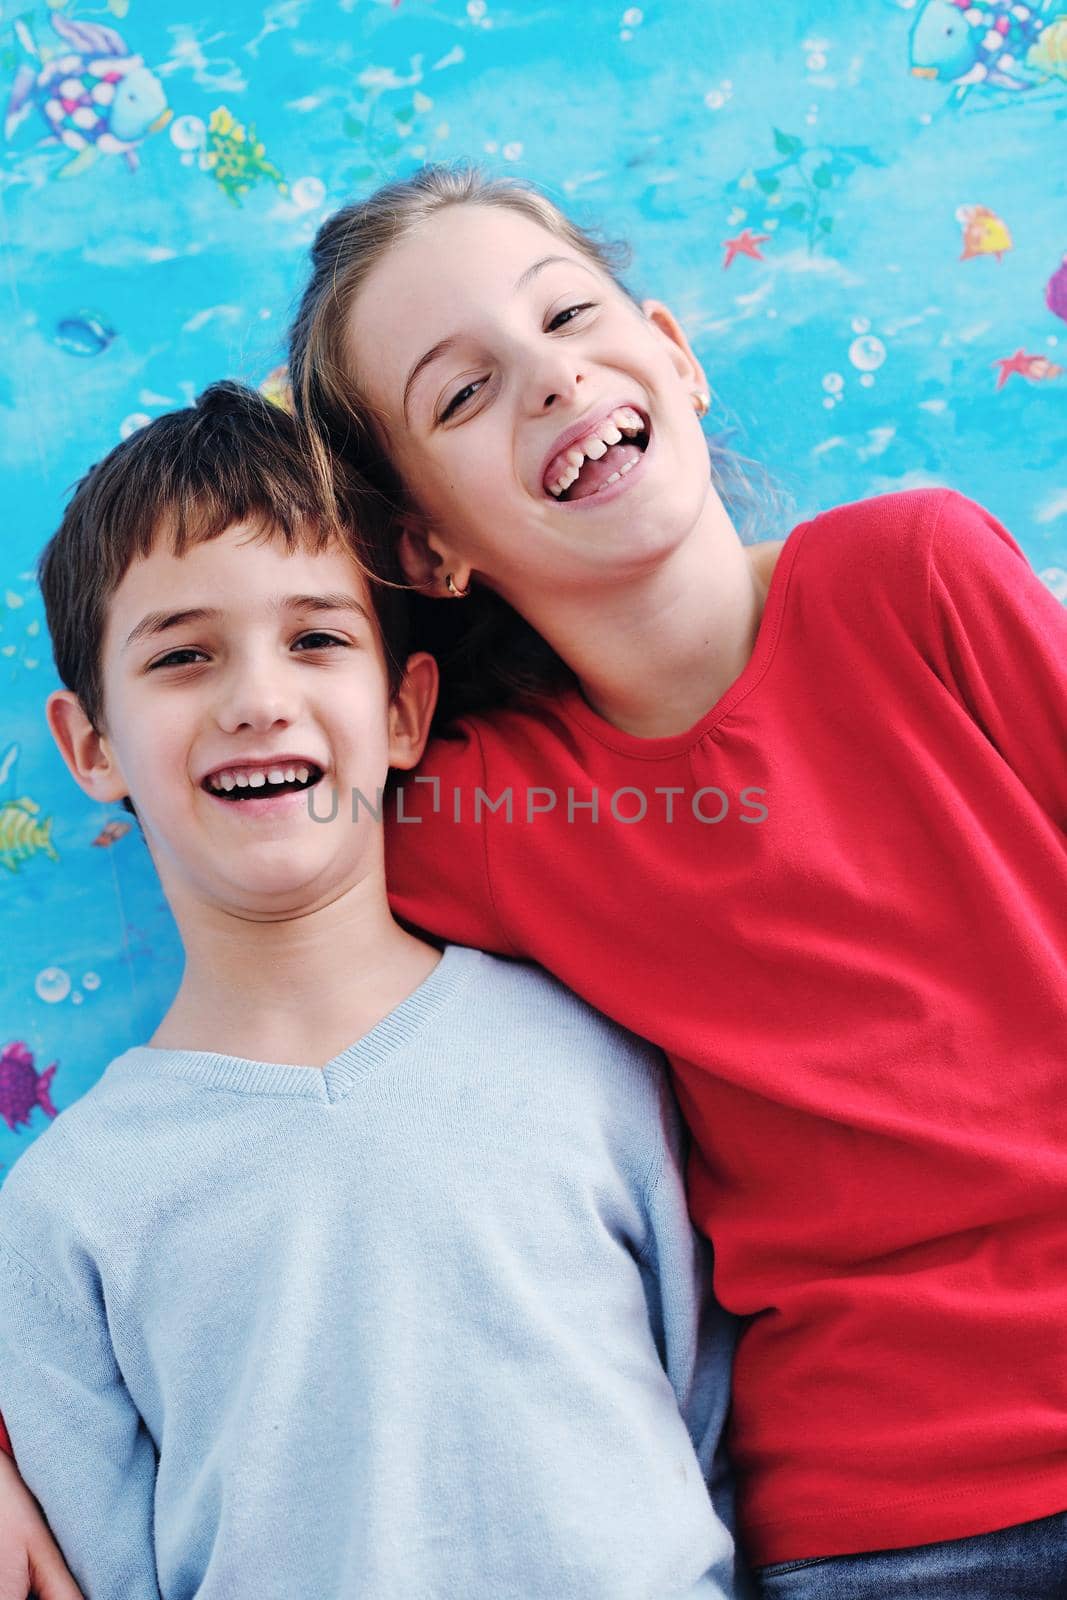 happy child kids portrait at home brother and sister hug and have fun and joy